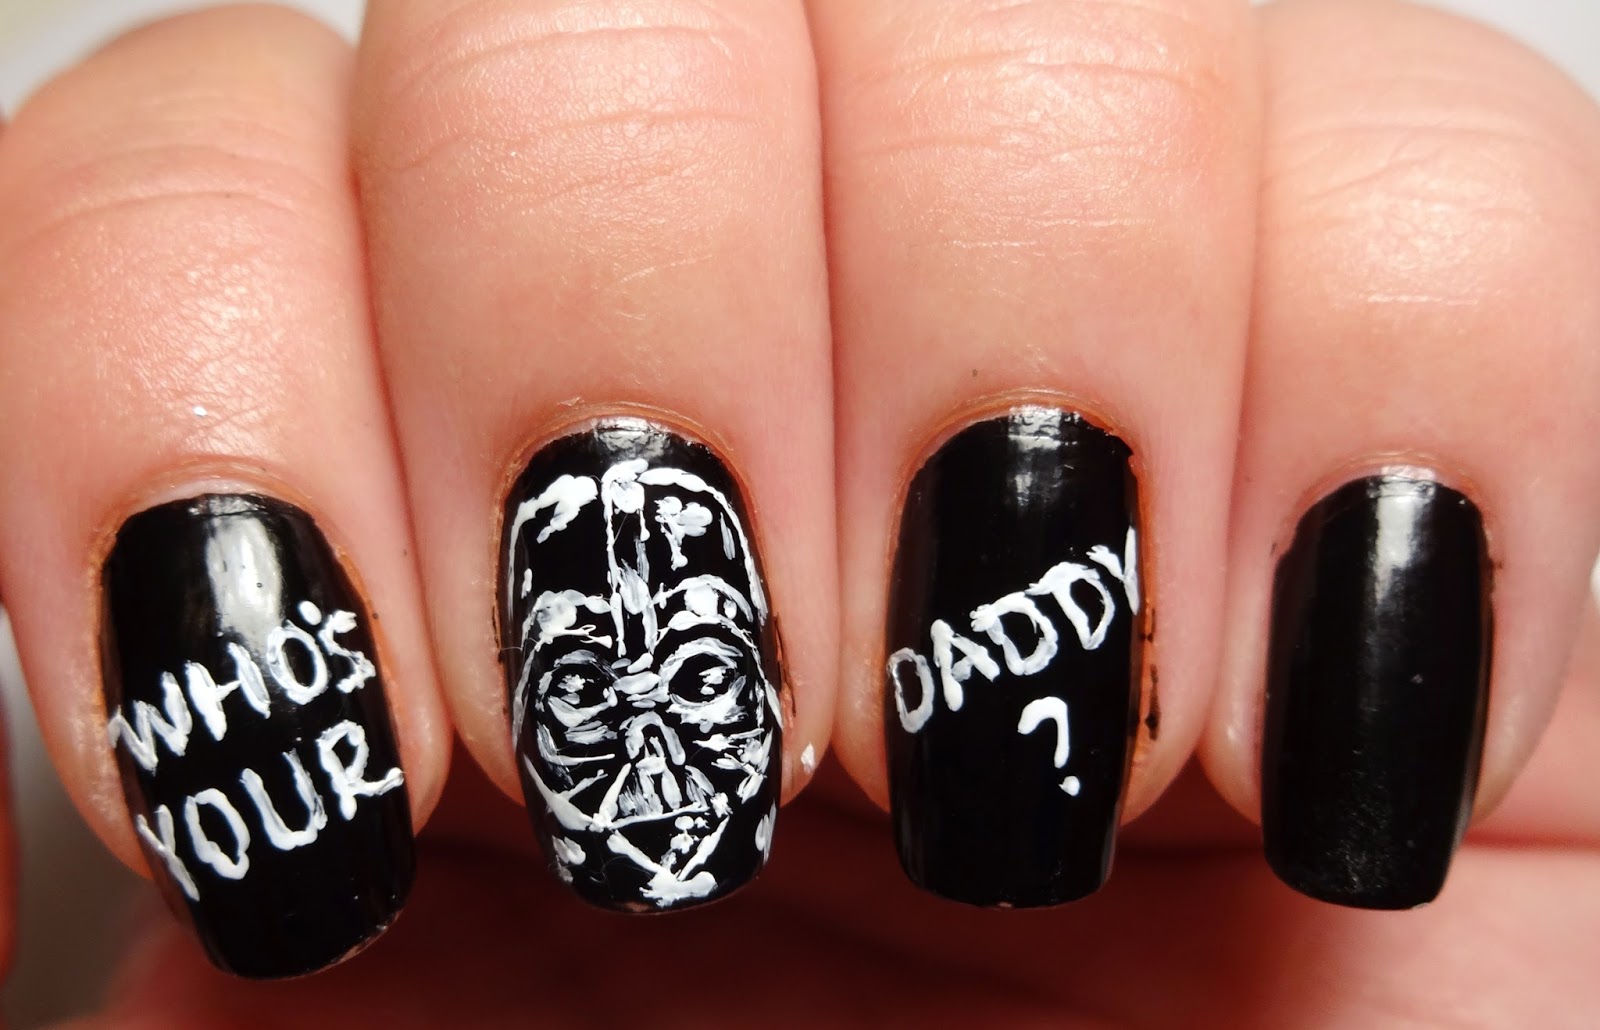 Who's Your Daddy Nails